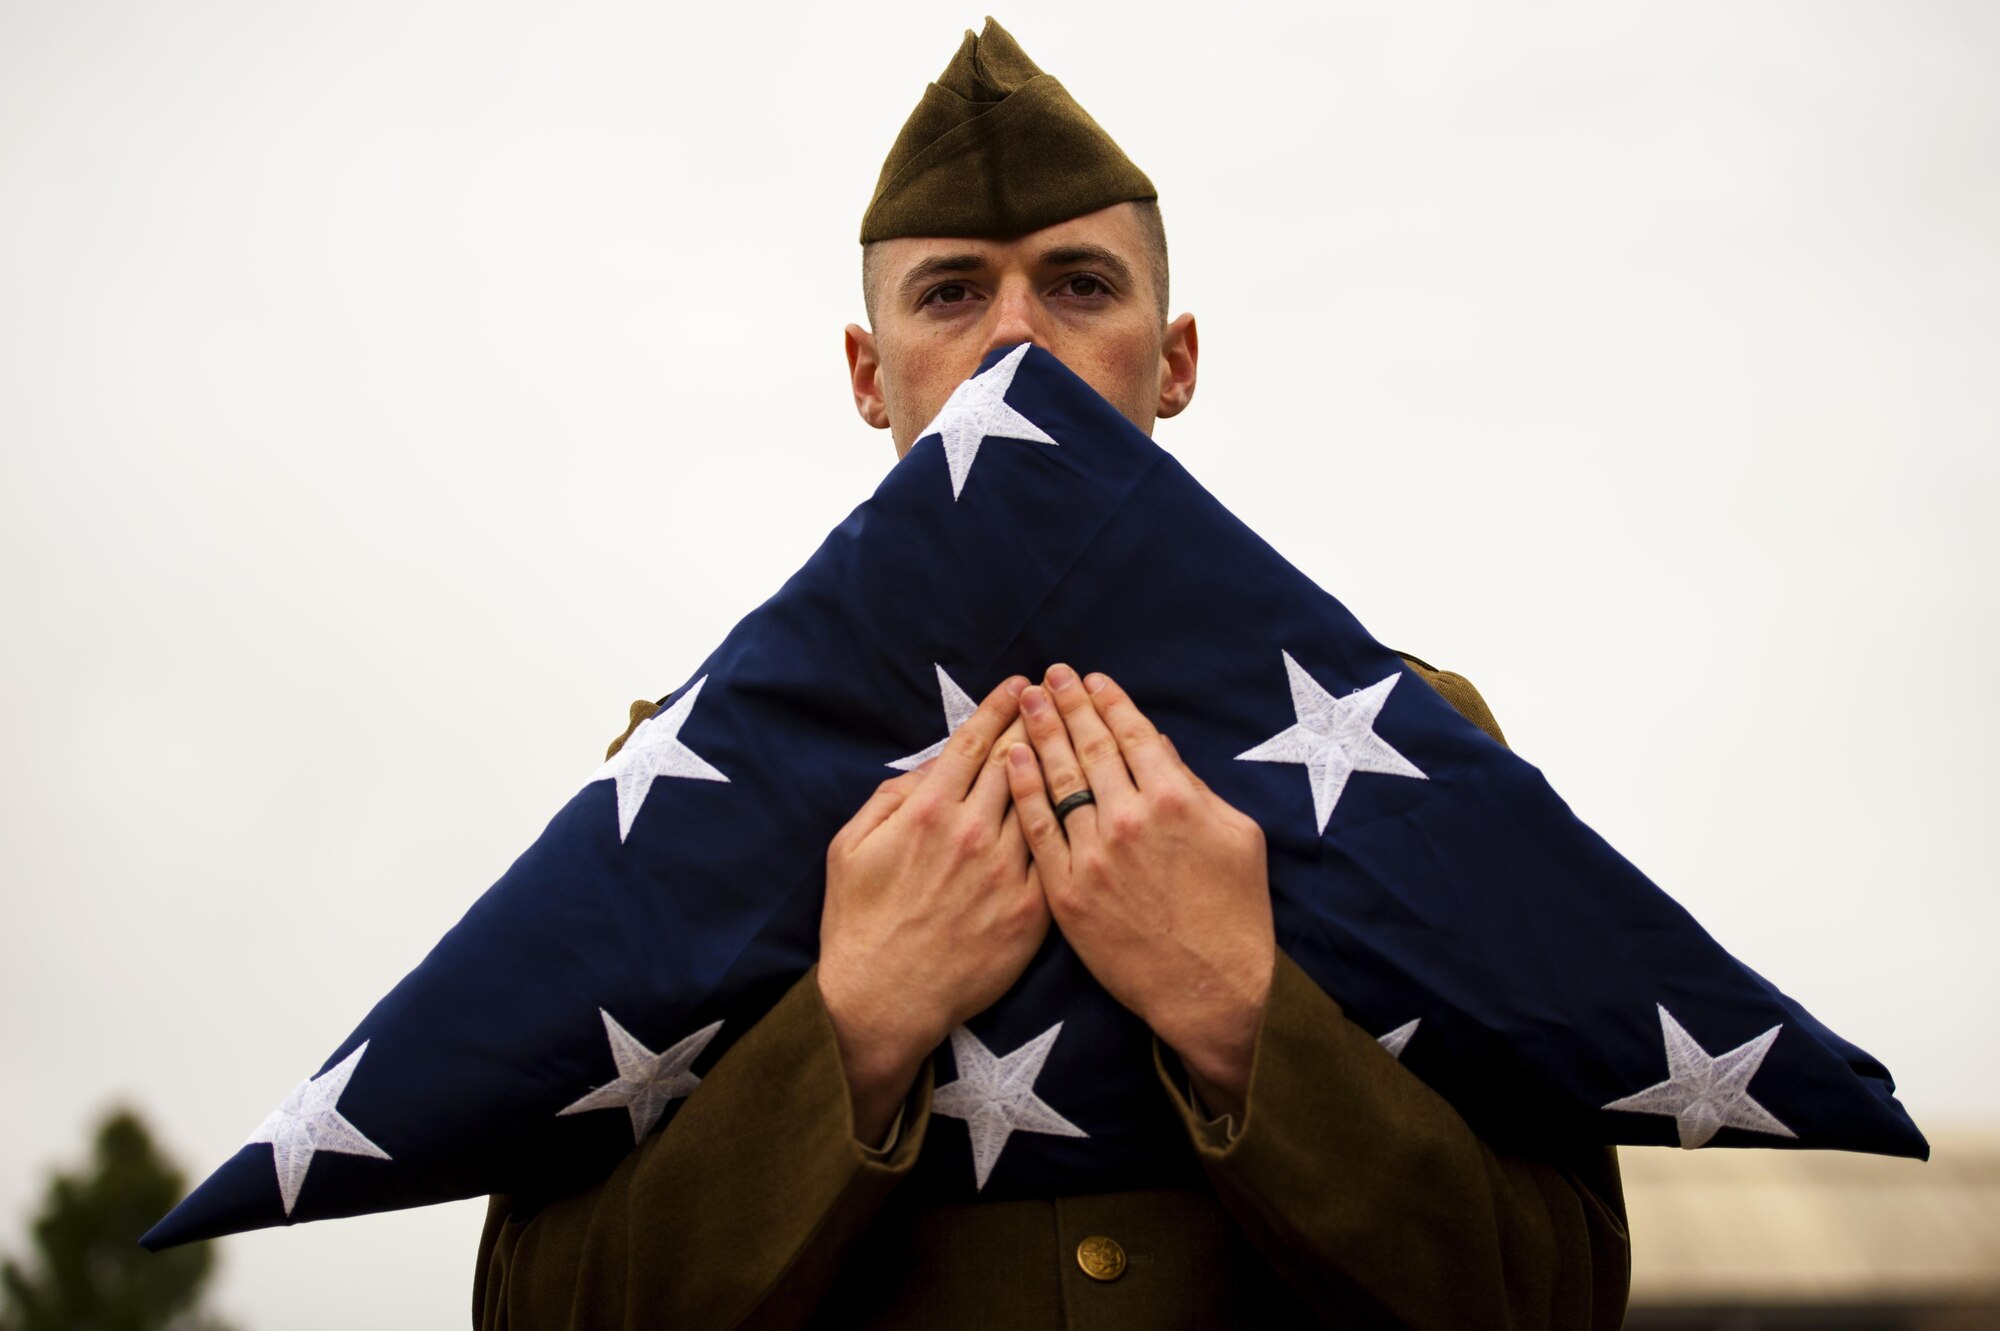 U.S. Air Force Senior Airman Austin T. Gregg, 17th Medical Support Squadron medical information systems technician, holds the American flag during the 75th Diamond Anniversary at the Norma Brown building on Goodfellow Air Force Base, Texas, Jan. 26, 2016. Honor guard members, dressed in uniforms from the 1940s, passed off the flag to a contemporary fitted honor guard to honor all generations of Goodfellow. (U.S. Air Force photo by Senior Airman Scott Jackson/Released)